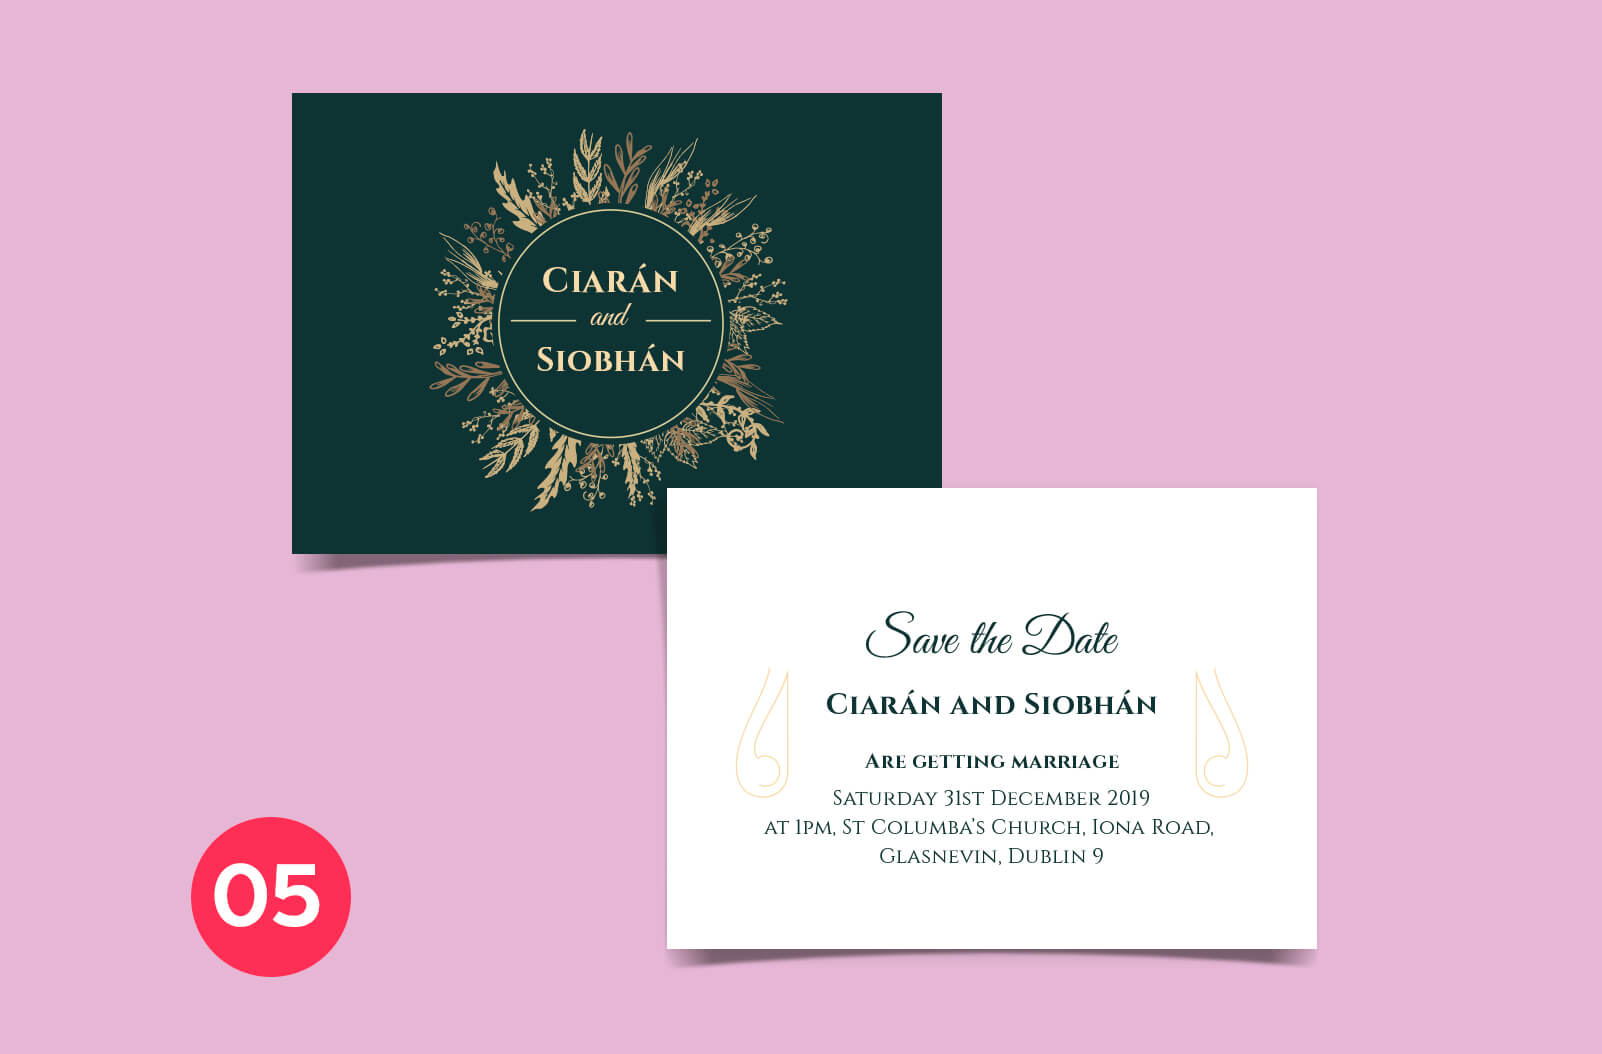 Save the Date Cards Ireland